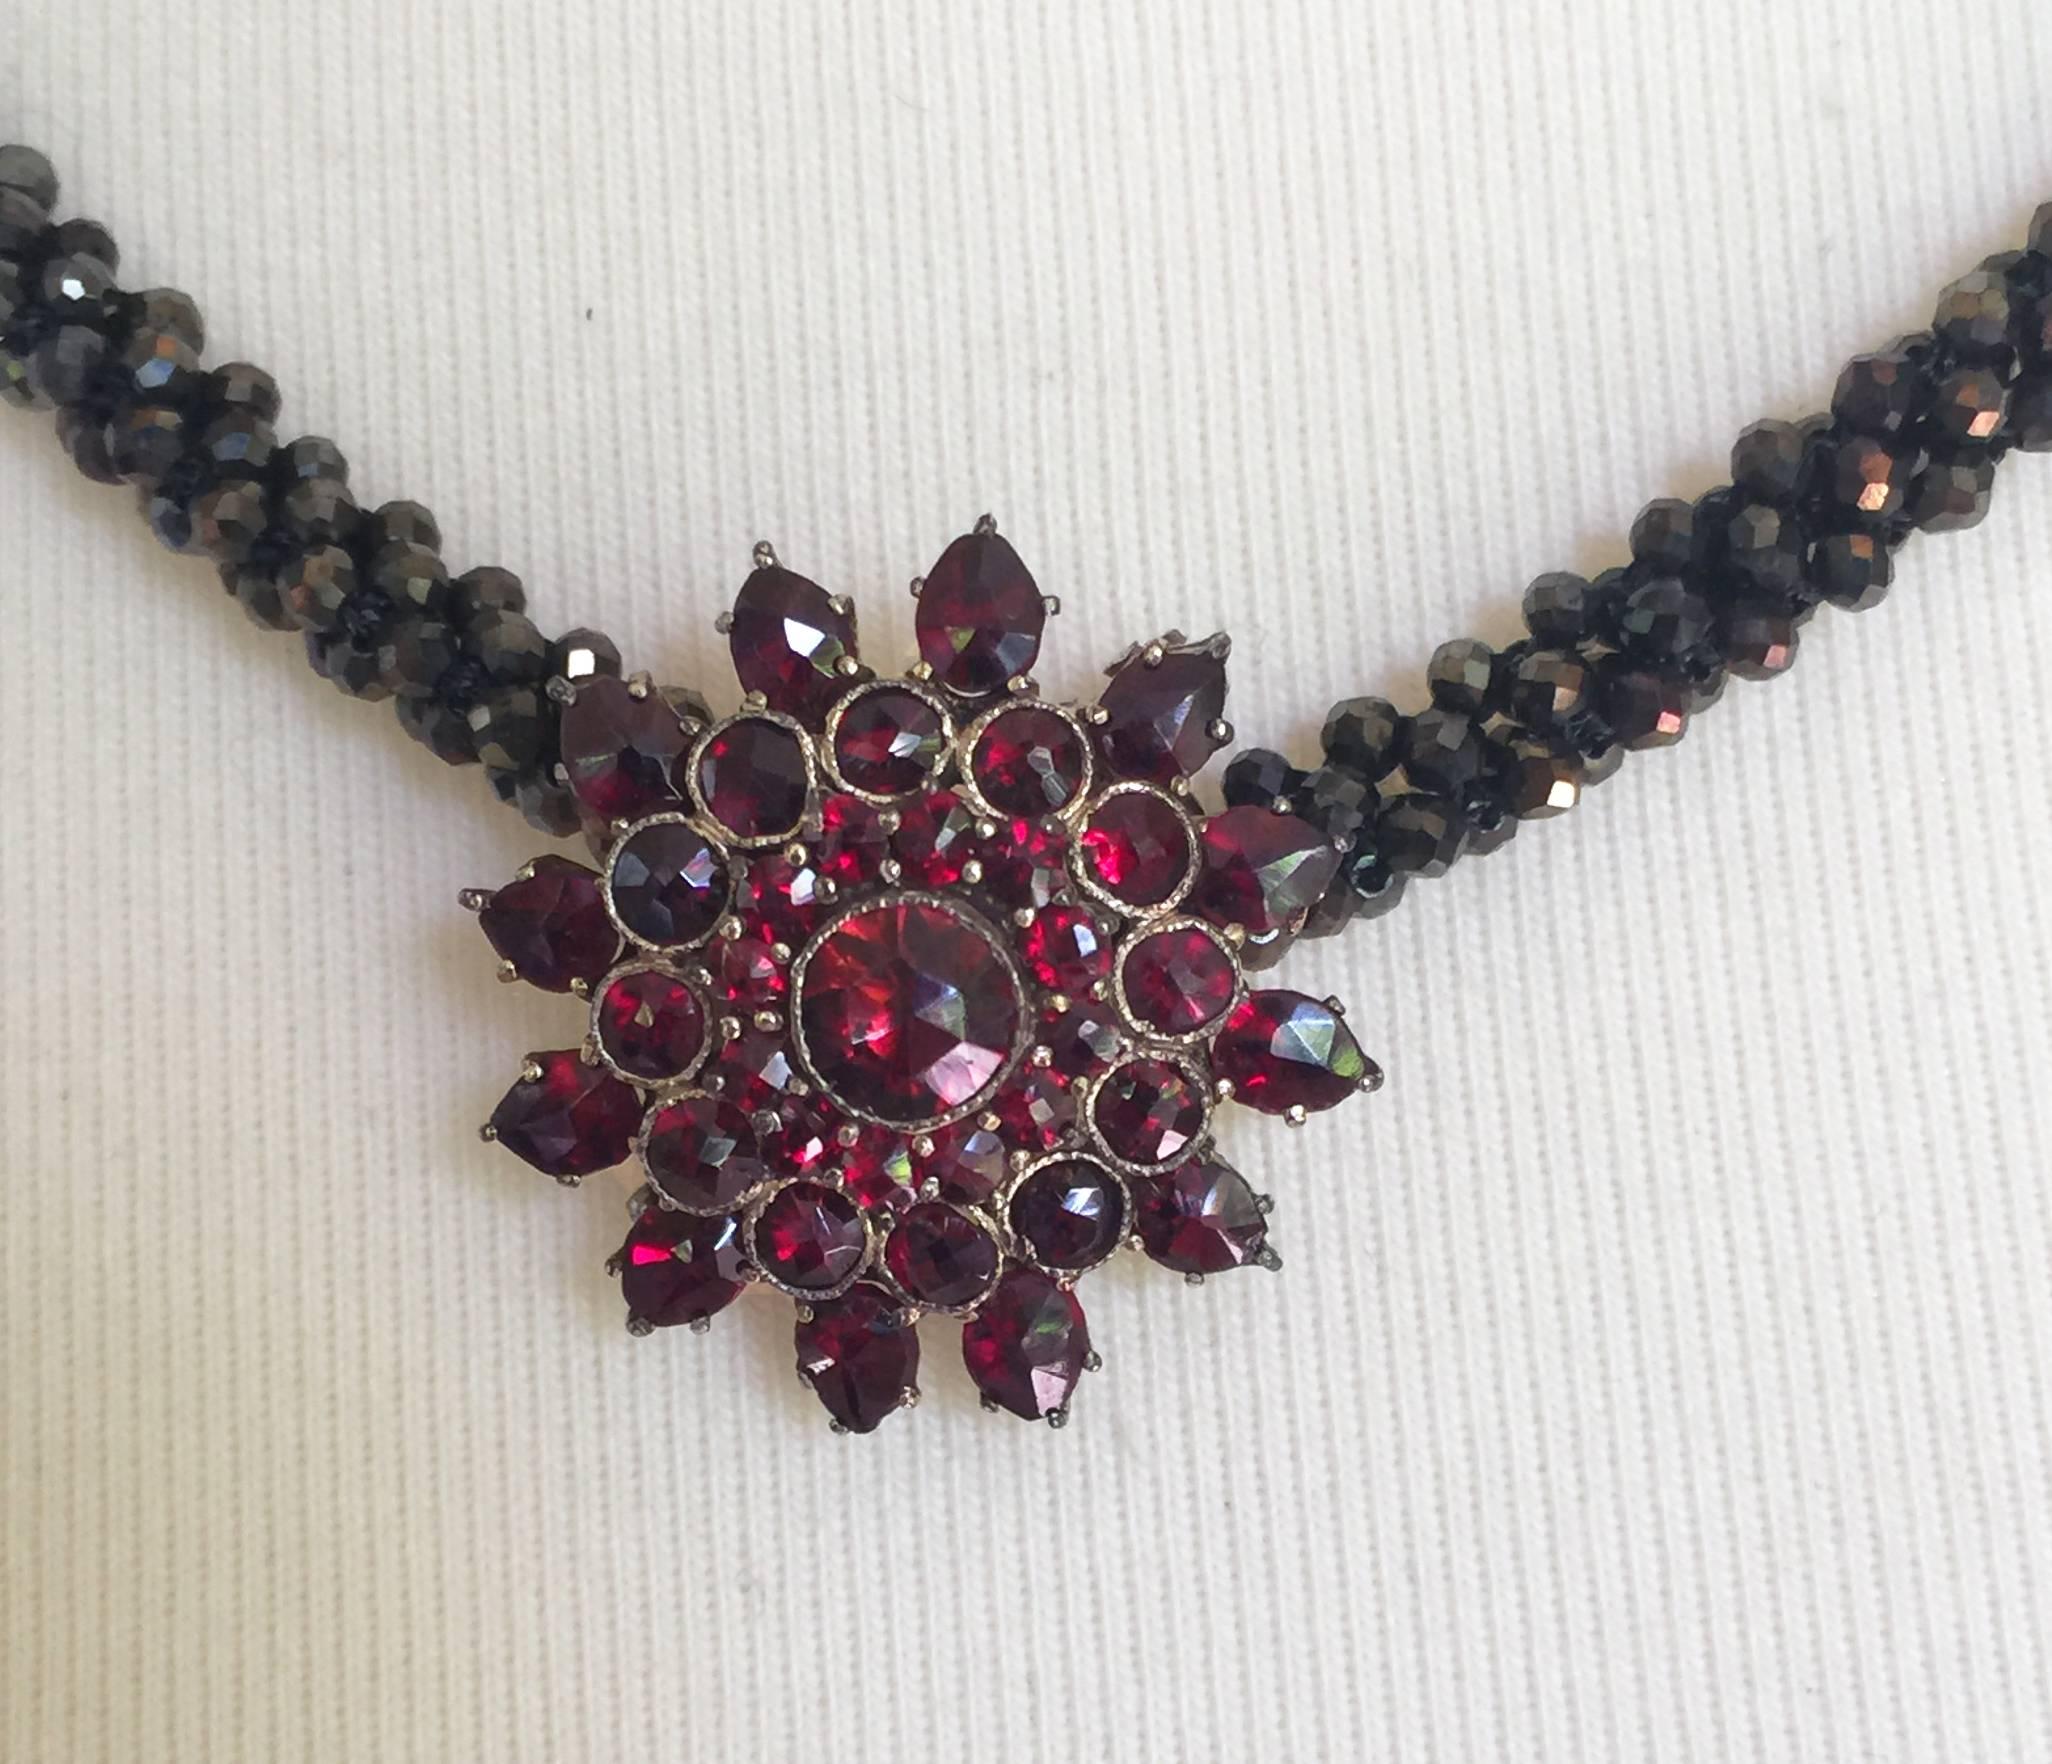 Made with hundreds of carefully selected, faceted copper toned black spinel beads and woven into a tight, three dimensional rope. The copper hue of the necklace matches well with the deep red garnet floral shaped vintage brooch. This necklace is